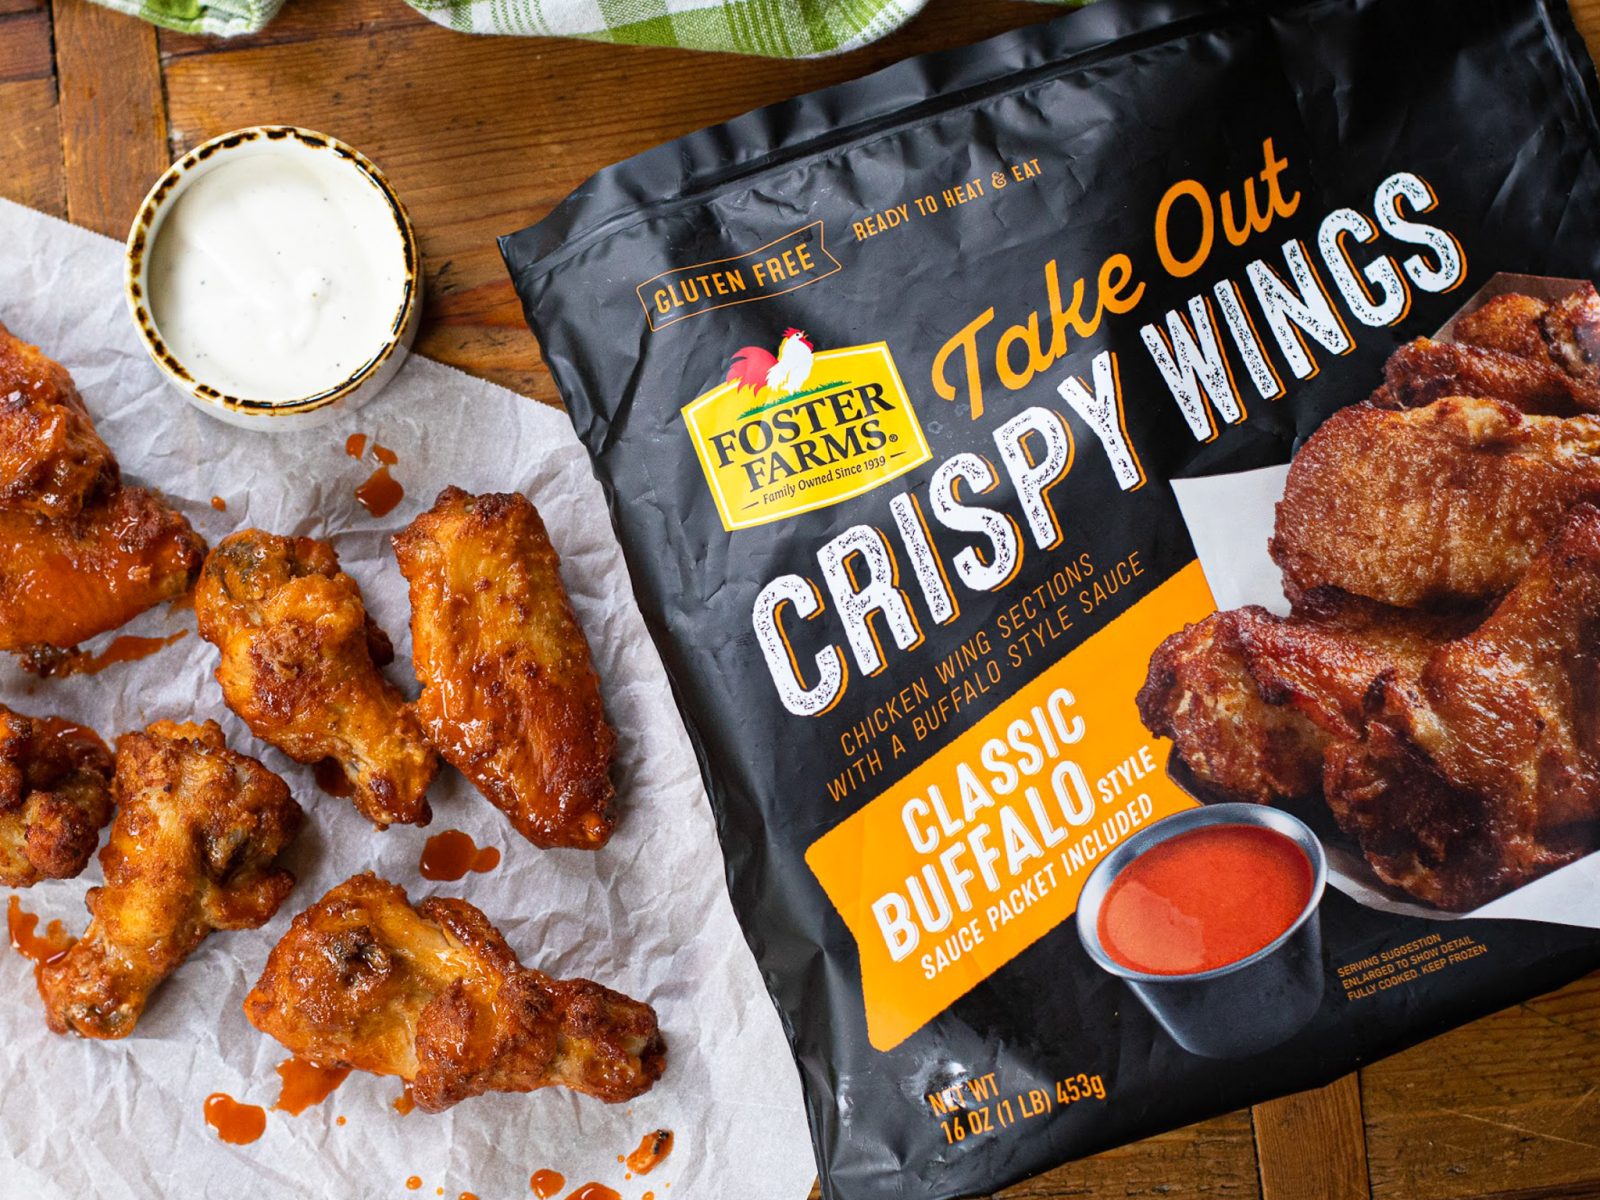 Foster Farms Take Out Crispy Wings A Low As $6.99 At Kroger (Regular Price $10.79)